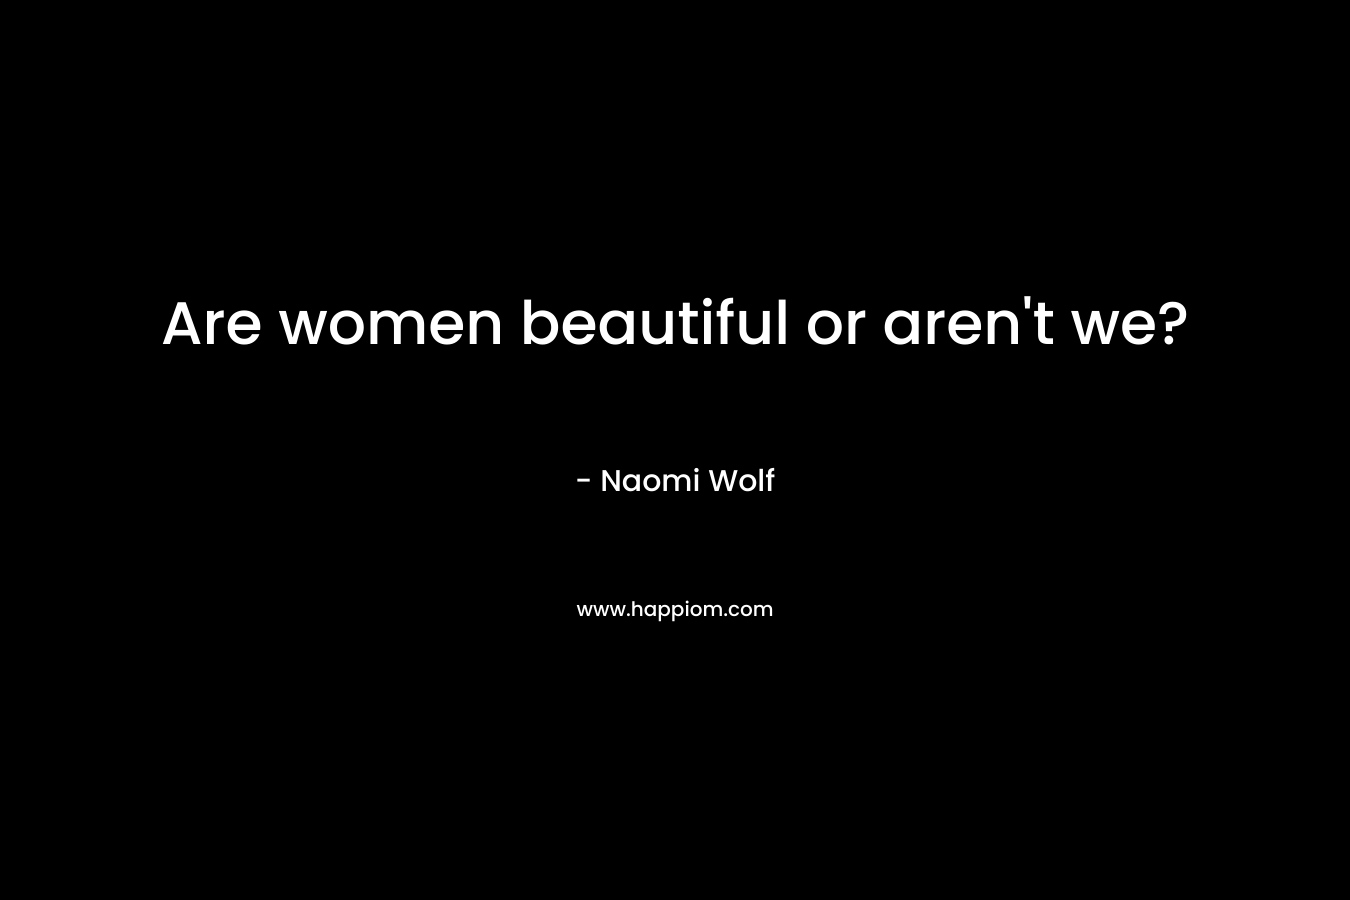 Are women beautiful or aren't we?